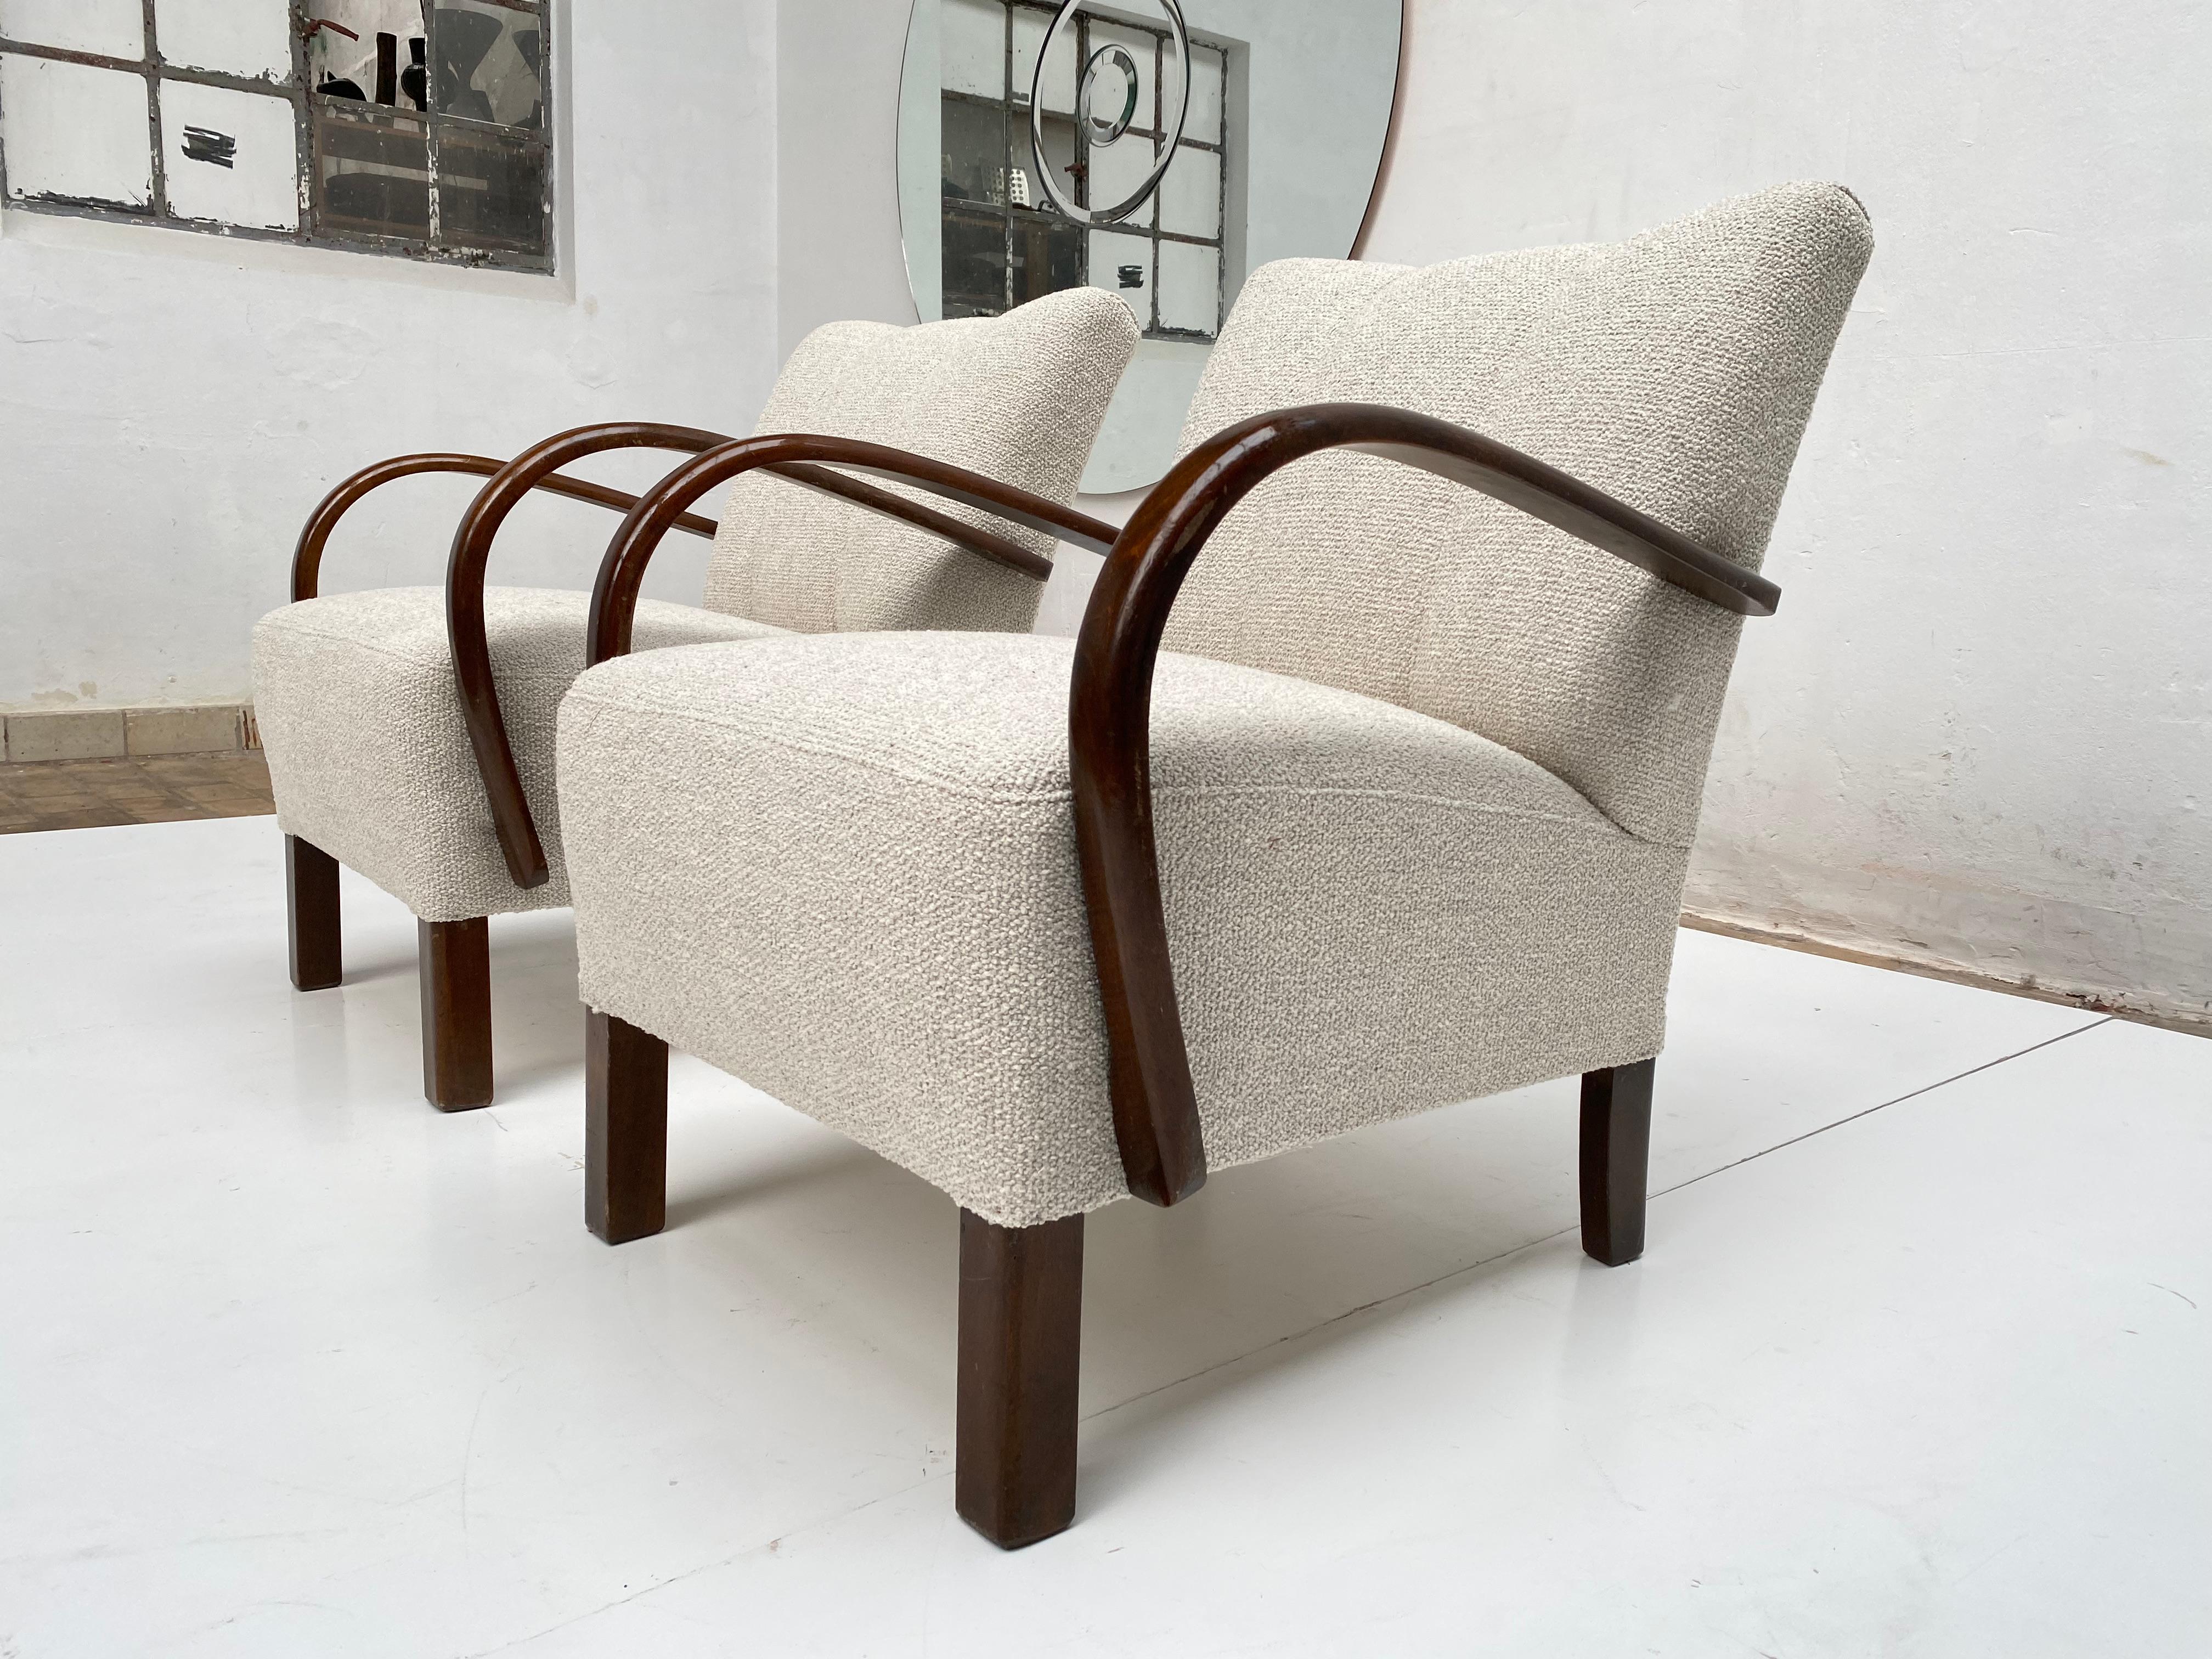 Lovely pair of 1950's lounge chairs produced by Dutch furniture manufacturer Hawema

Mahogany stained beechwood armrests and construction

A very nice example of Classic 1950's upholstery work with steel spring interior, cotton and stepped grass